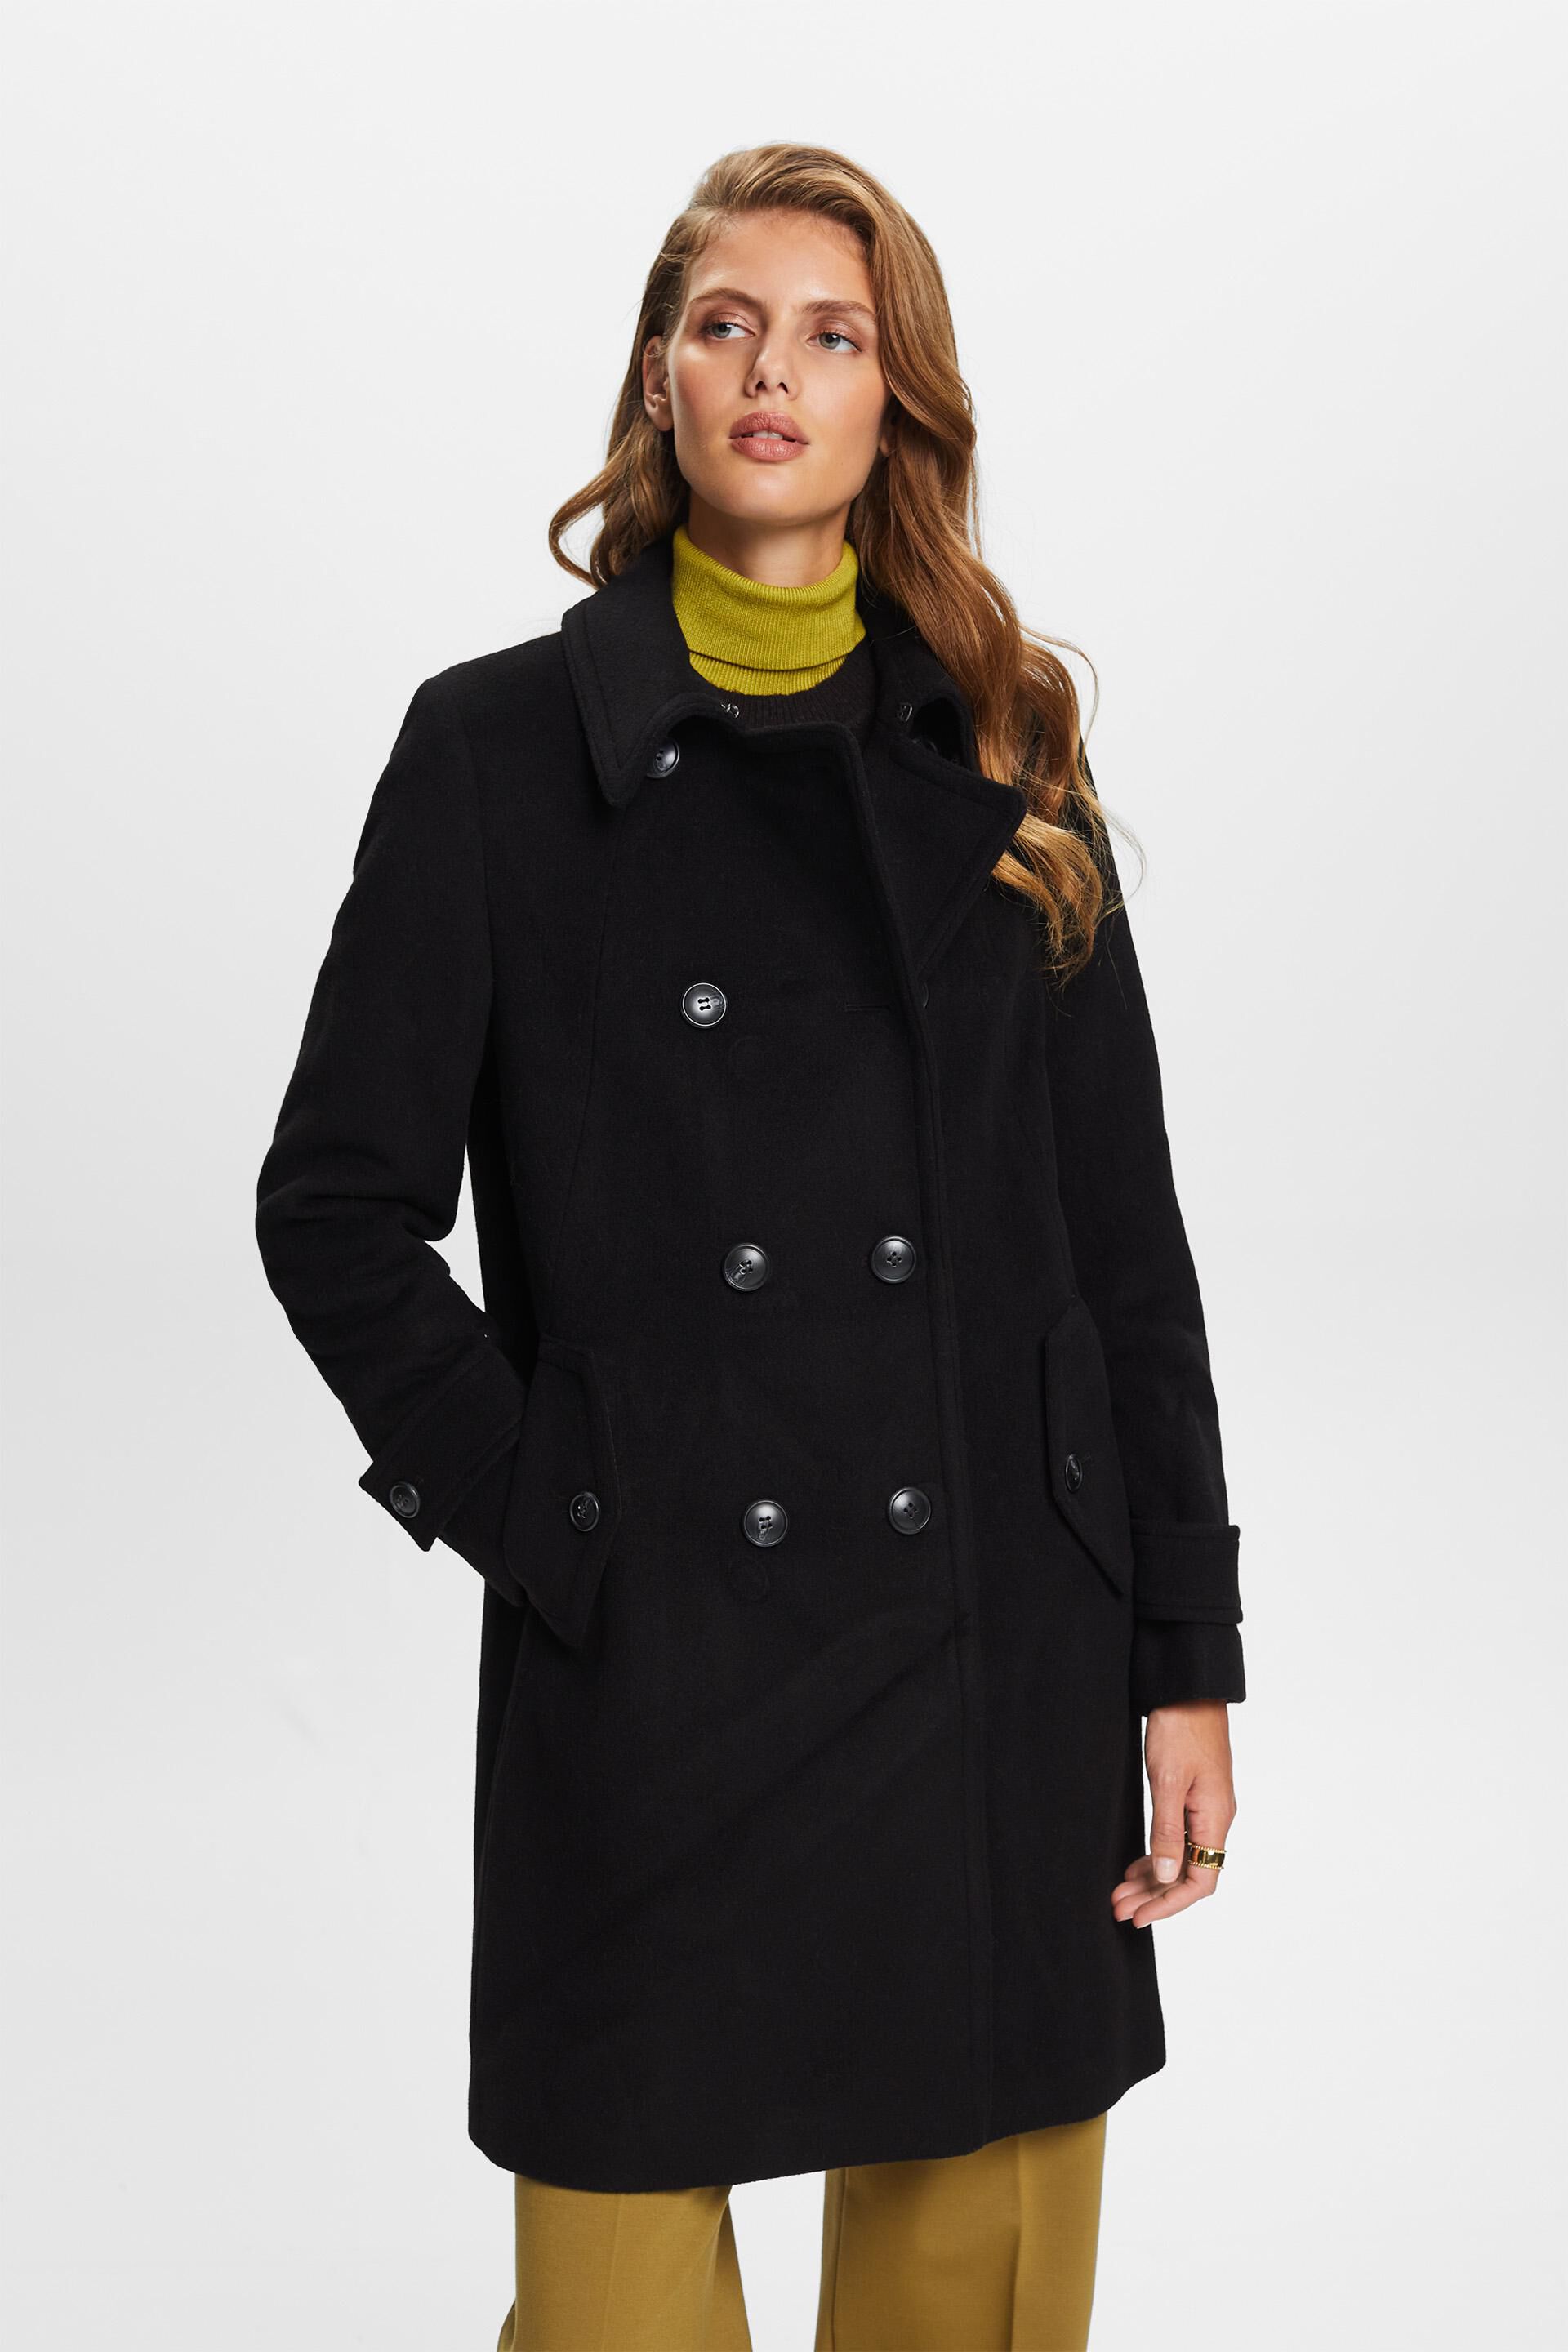 Esprit wool cashmere coat Recycelt: blend with